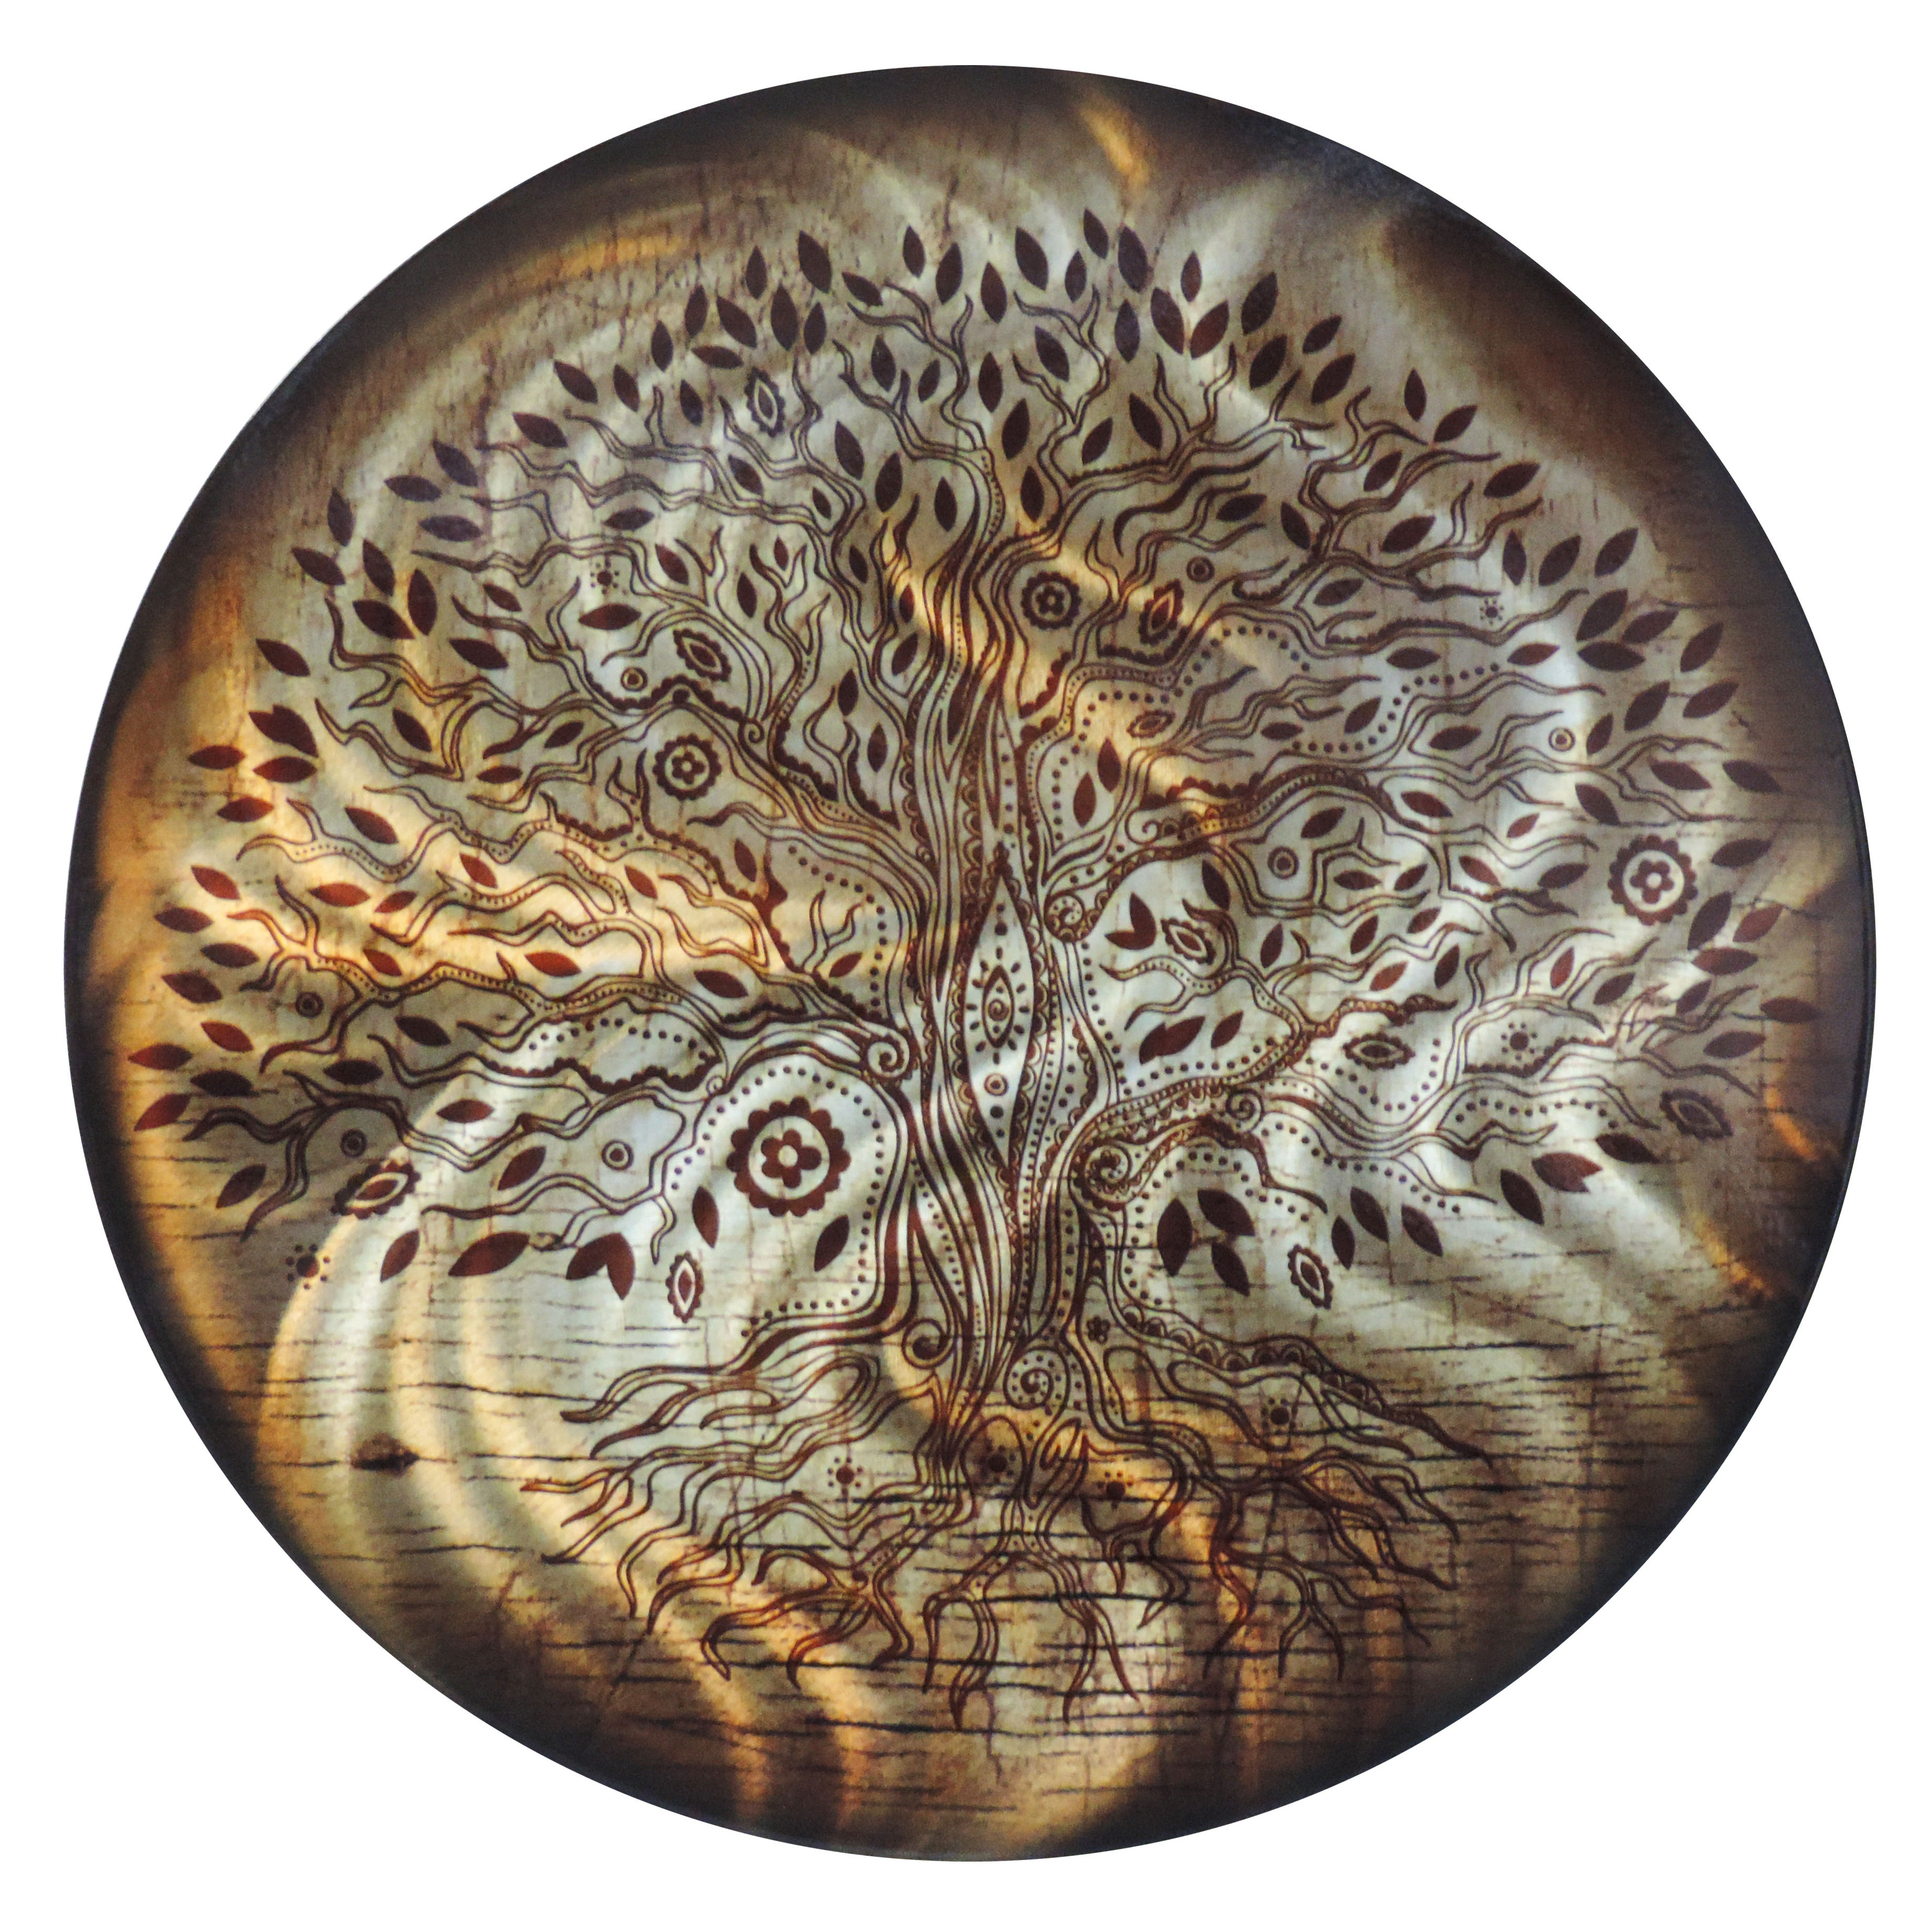 Round art. Amber graphic. Unique Trees made of Metal.